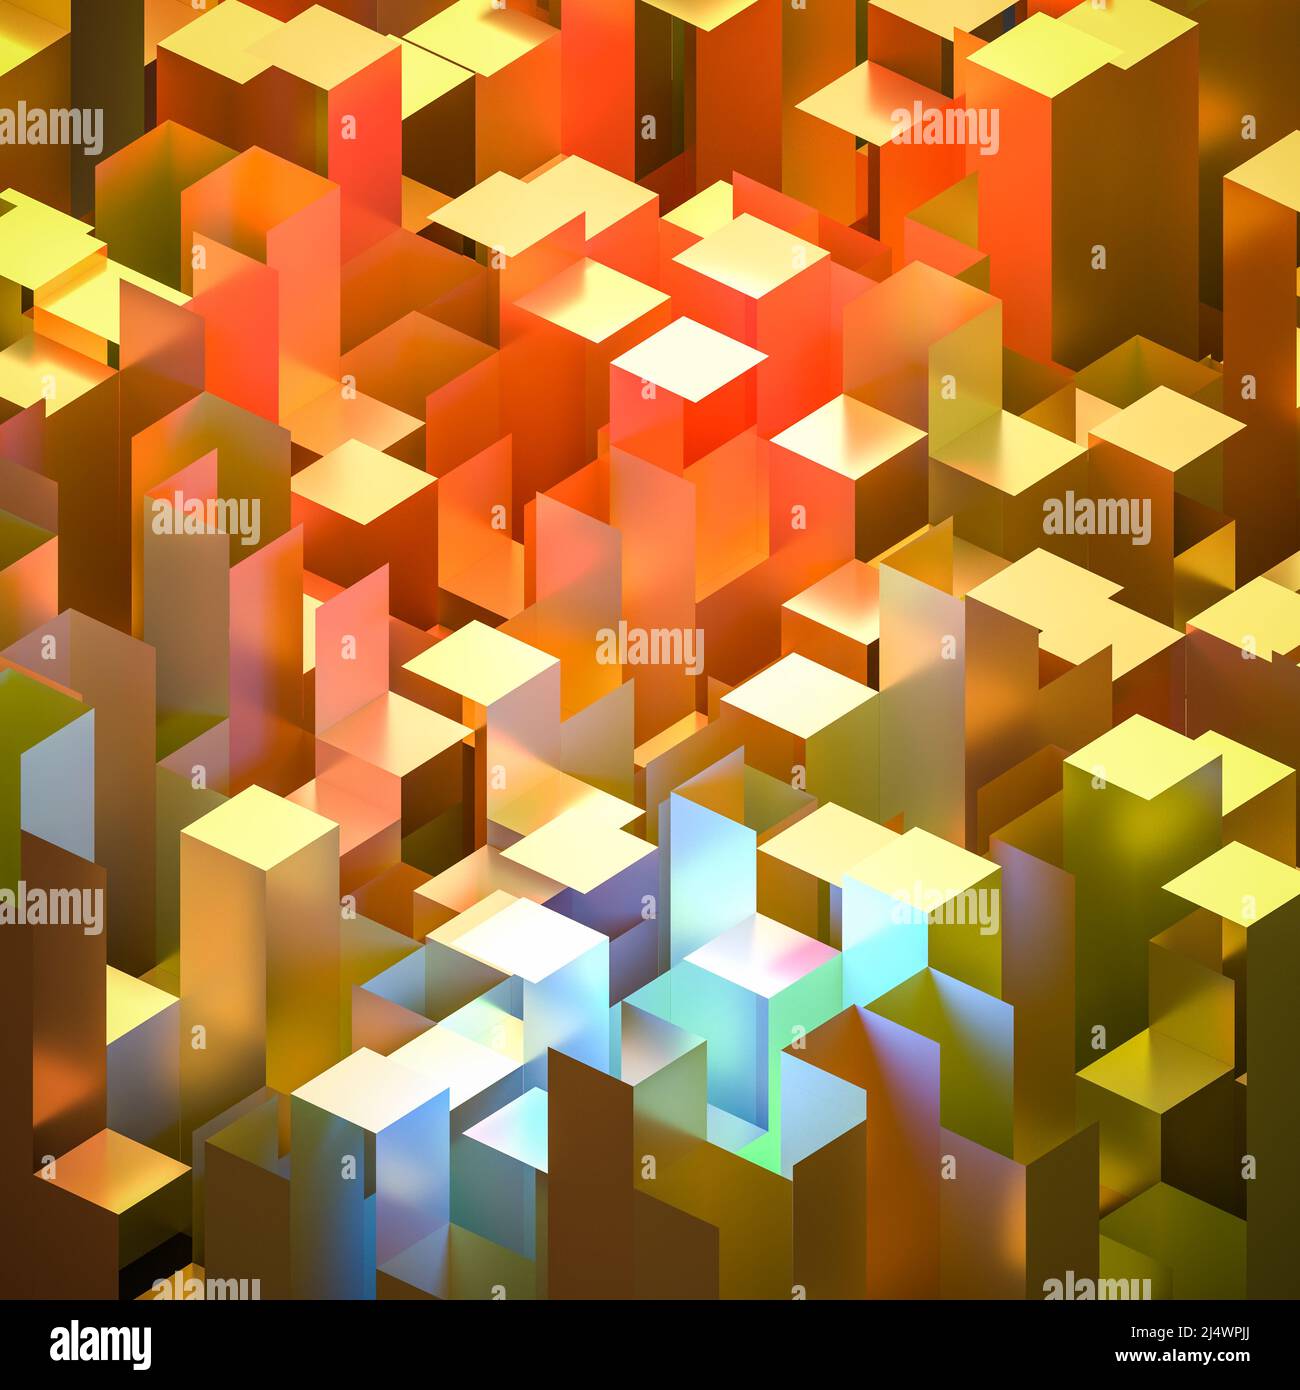 Abstract background of yellow red blue isometric cuboids depicting a cityscape Stock Photo